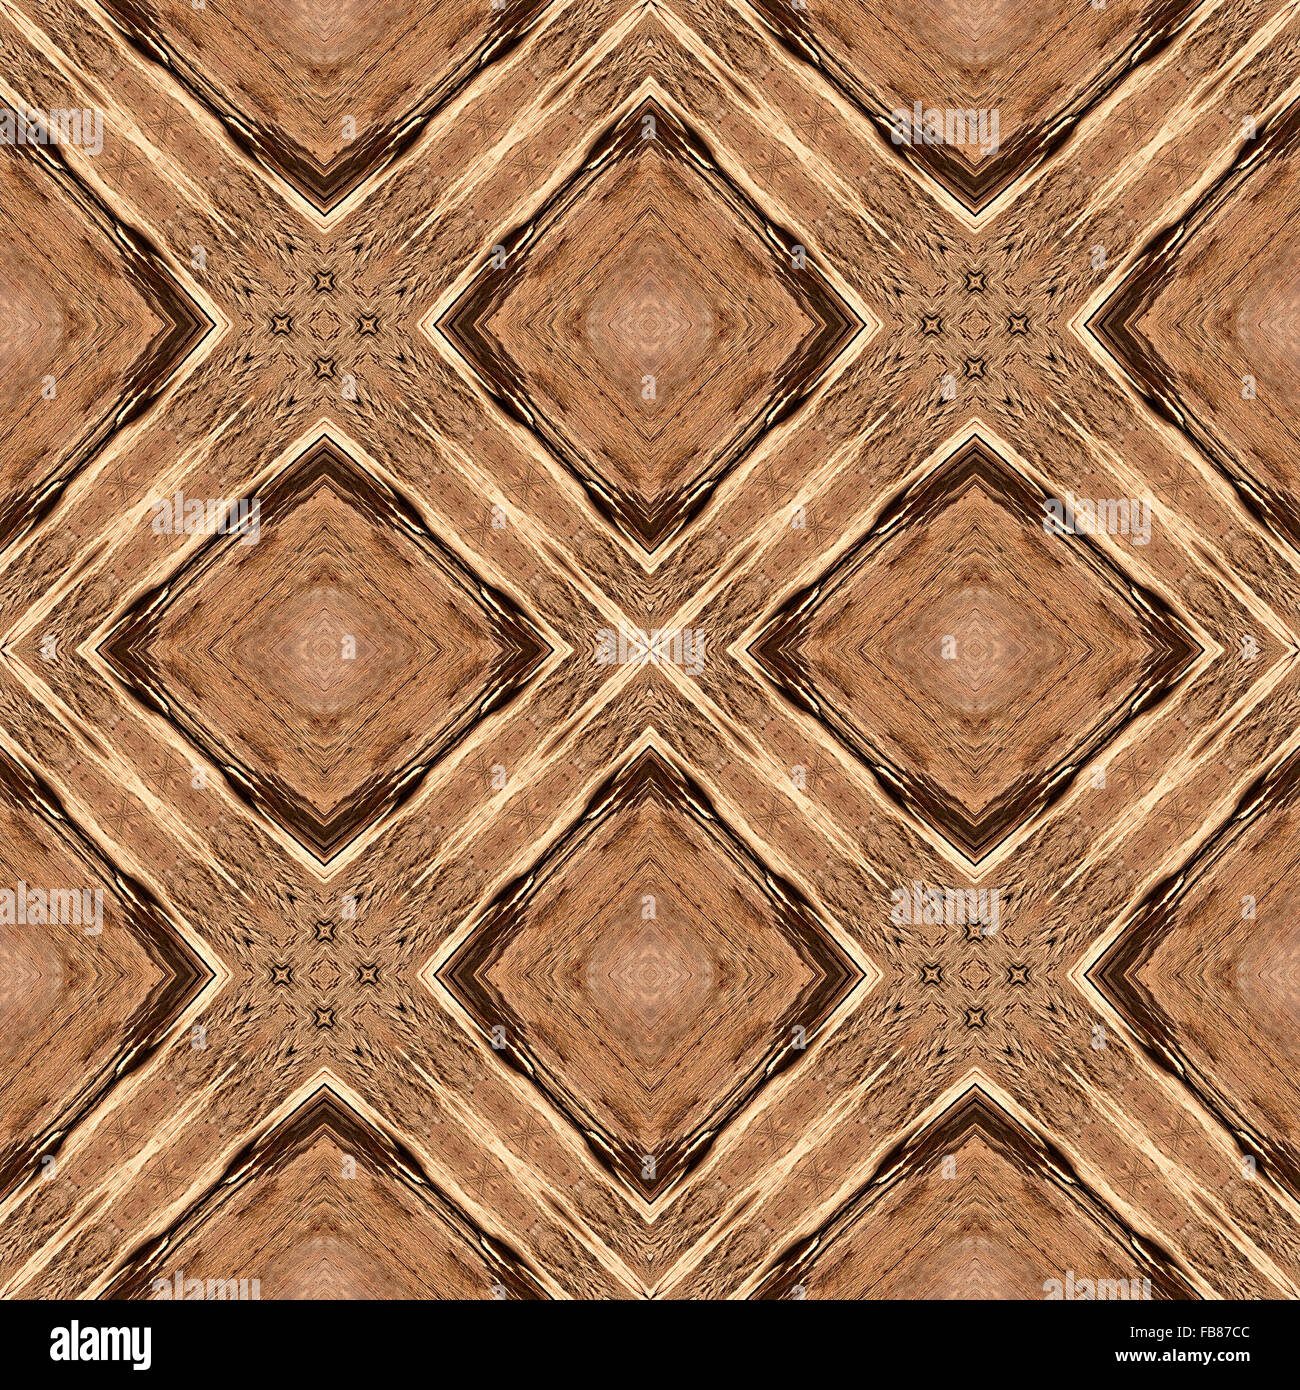 Wooden seamless abstract background or texture geometric illustration, inlay. Stock Photo